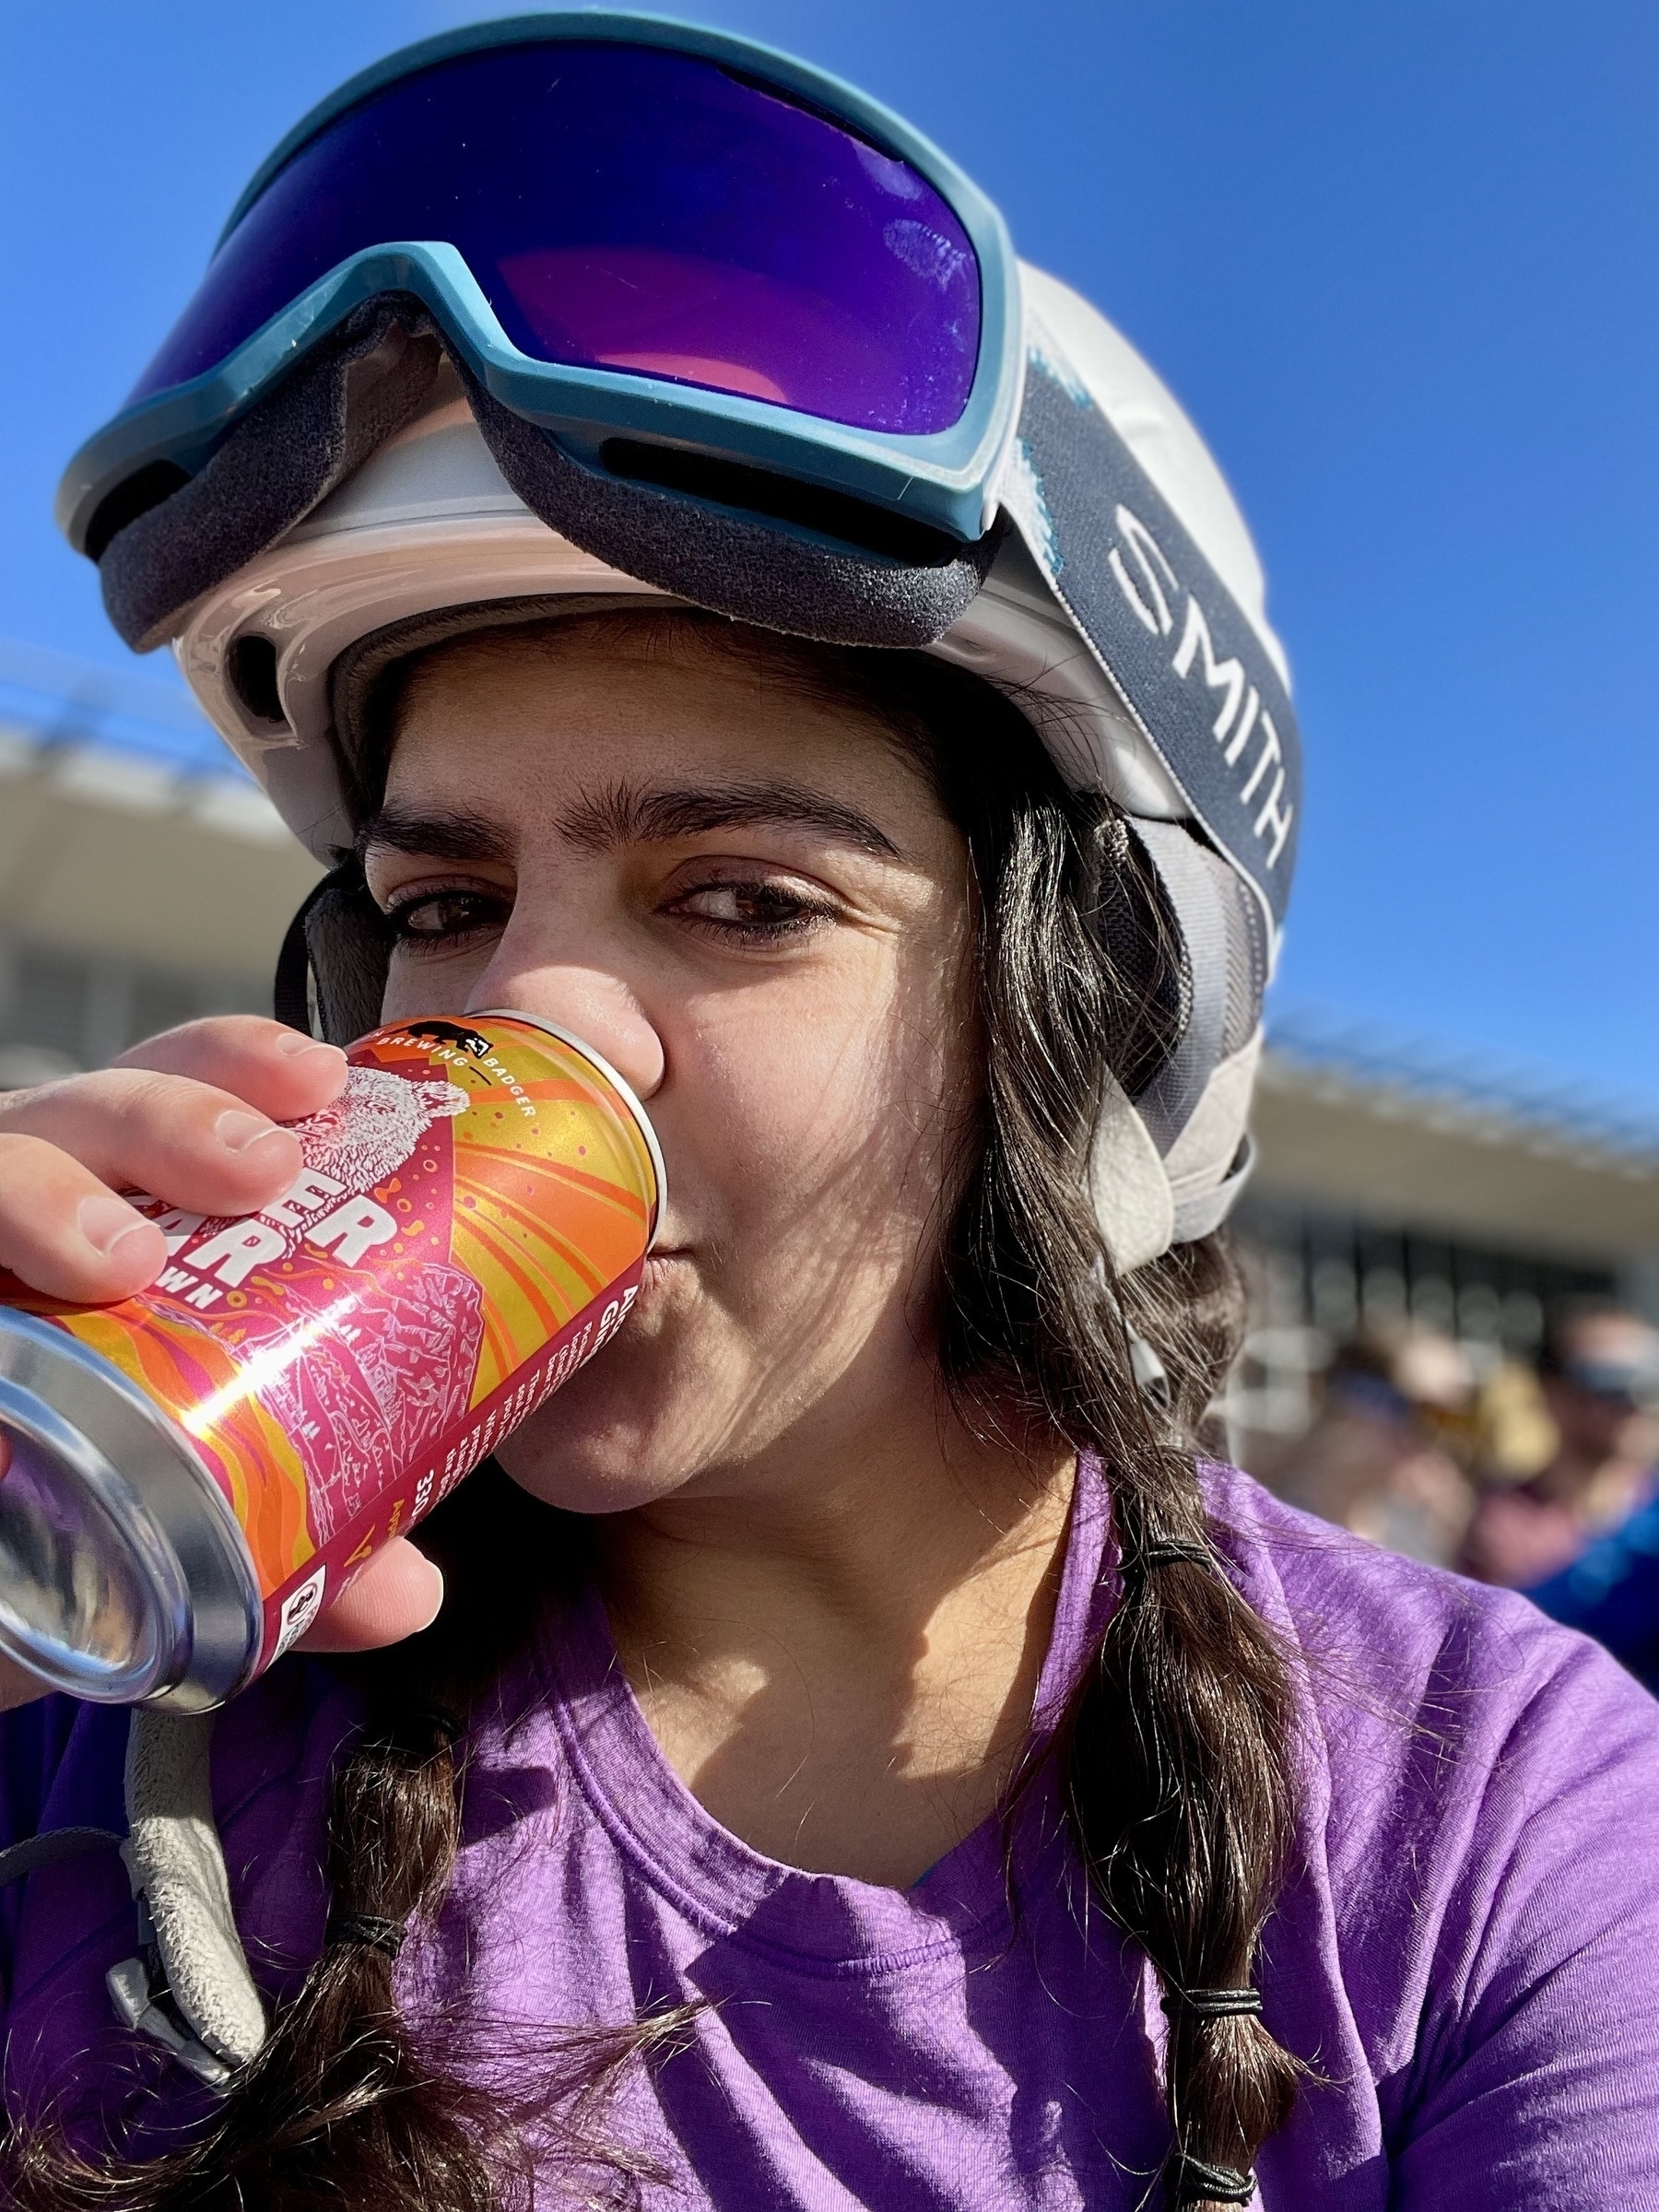 Meera in a ski helmet and goggles drinking a beer.